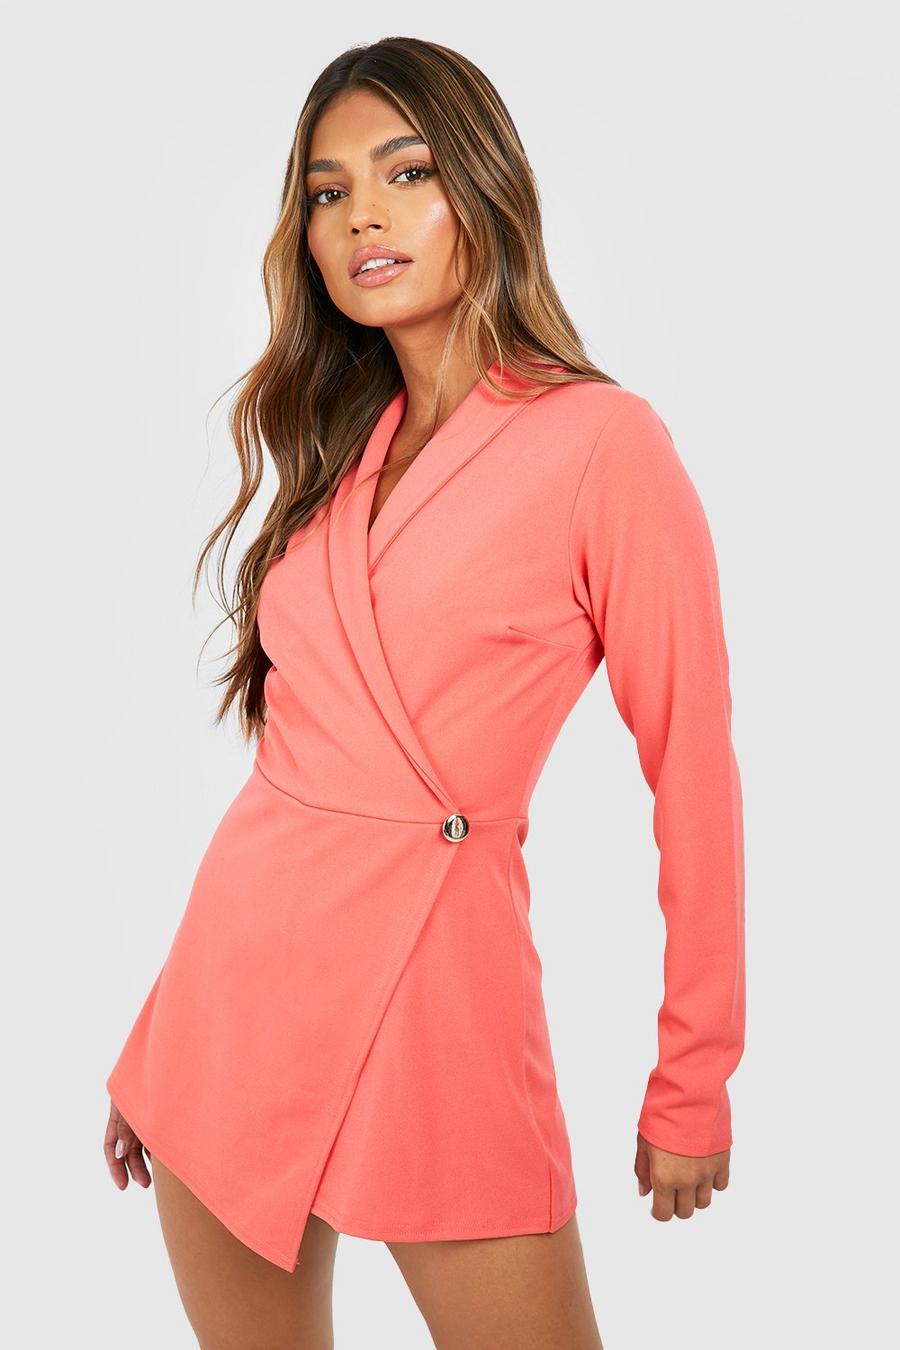 Coral pink Tailored Asymmetric Skort Playsuit